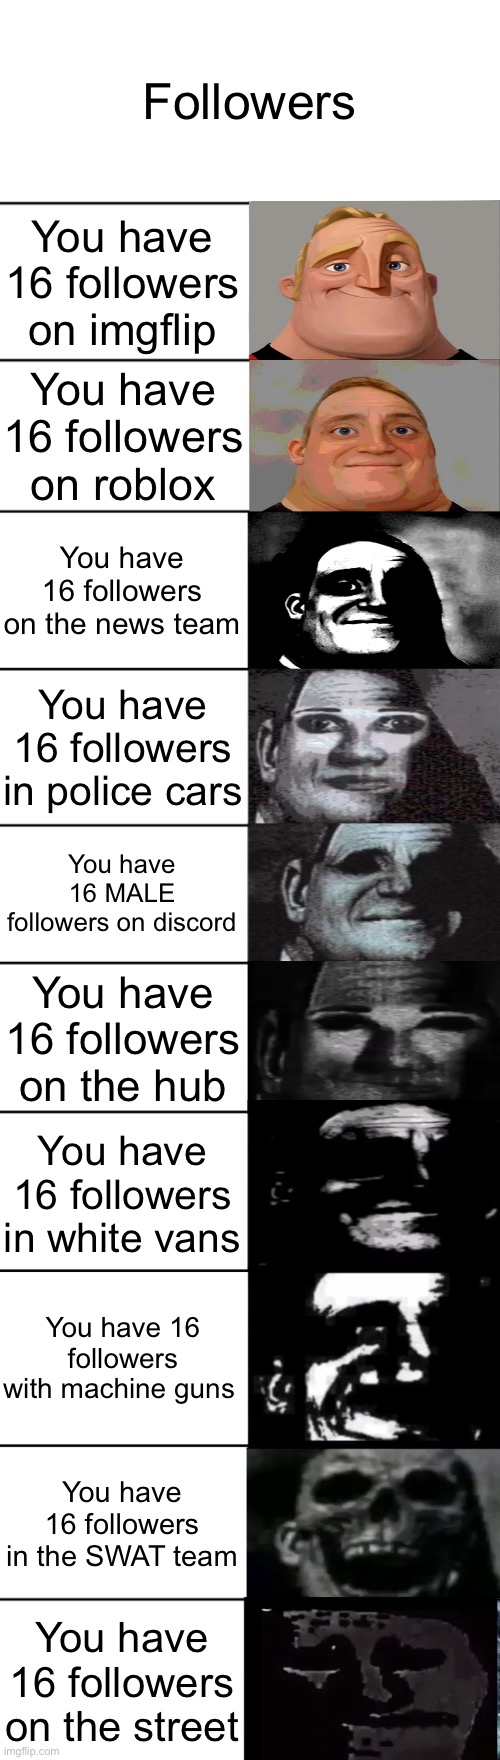 Followers | Followers; You have 16 followers on imgflip; You have 16 followers on roblox; You have 16 followers on the news team; You have 16 followers in police cars; You have 16 MALE followers on discord; You have 16 followers on the hub; You have 16 followers in white vans; You have 16 followers with machine guns; You have 16 followers in the SWAT team; You have 16 followers on the street | image tagged in mr incredible becoming uncanny,funny memes,funny,memes,dark humor,traumatized mr incredible | made w/ Imgflip meme maker